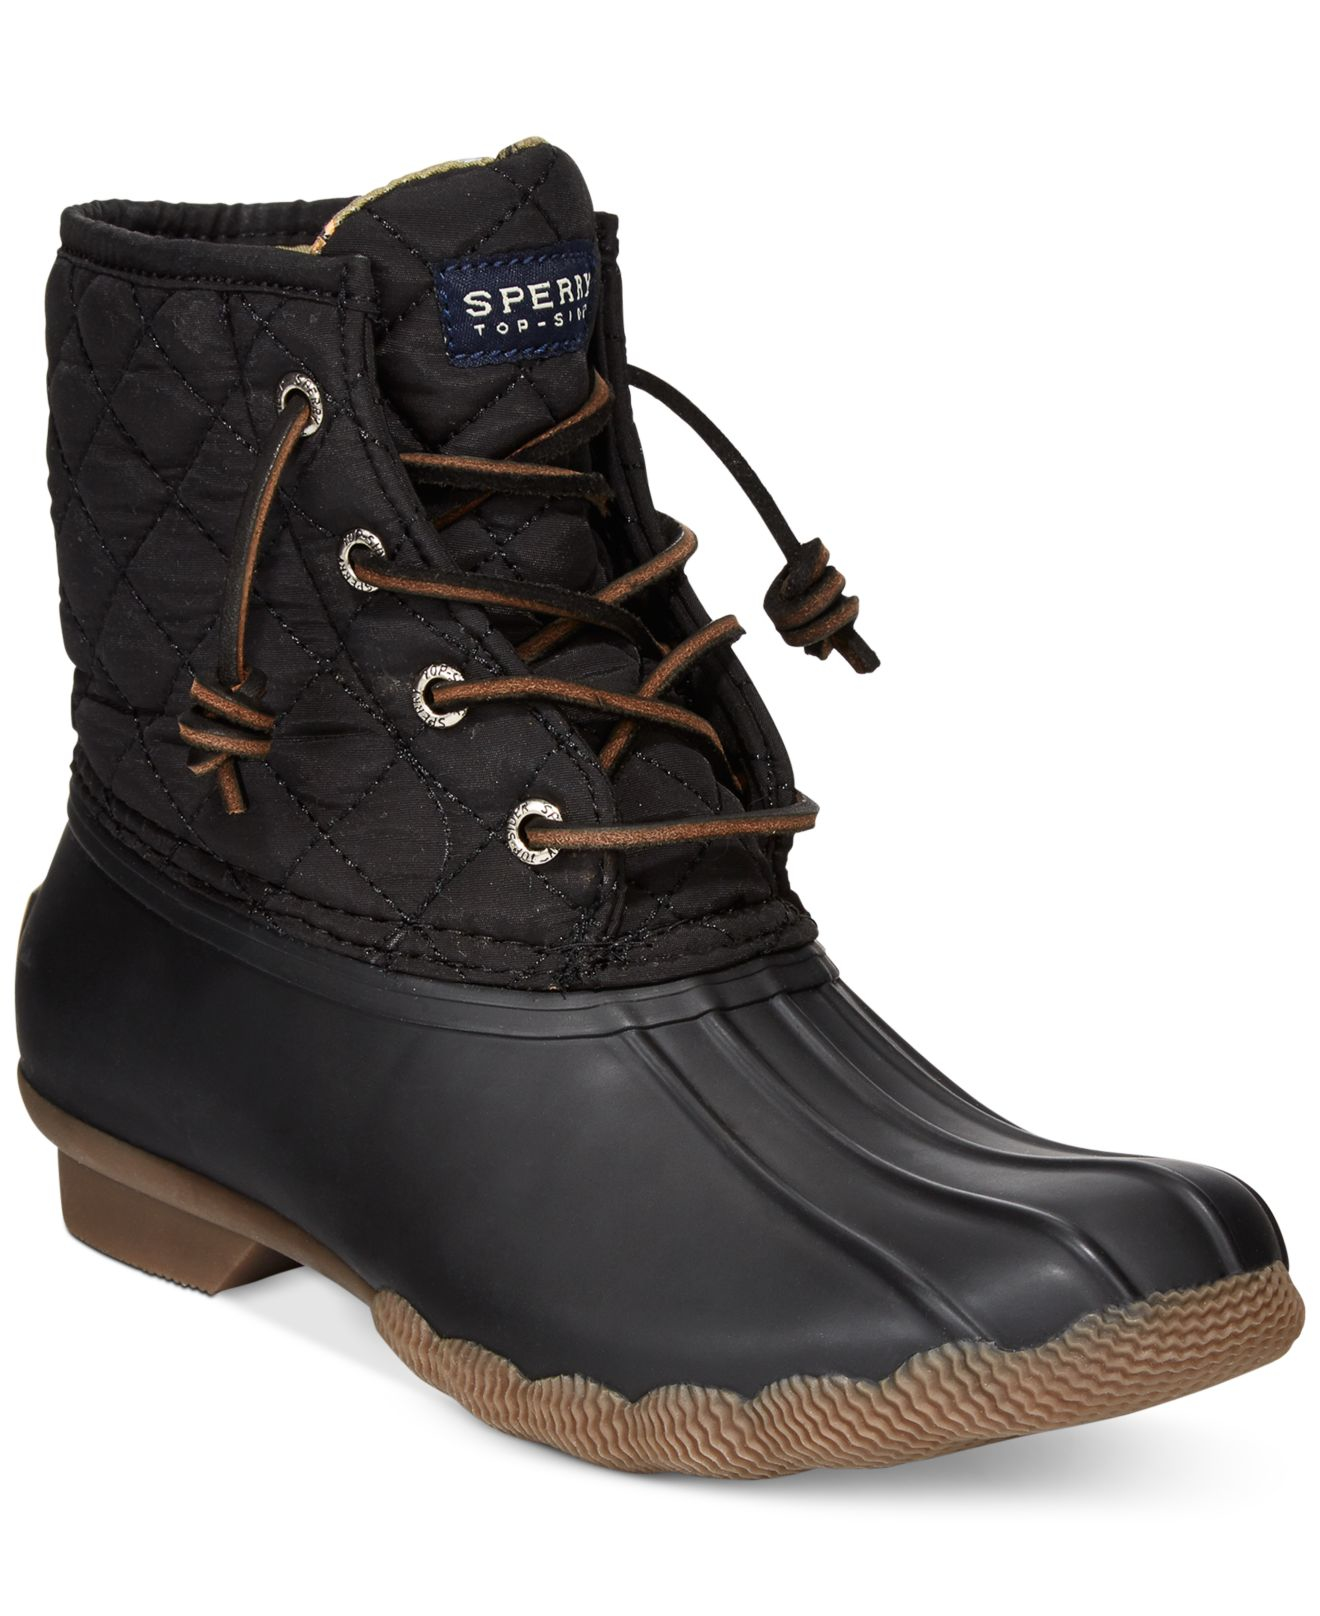 black sperry duck boots